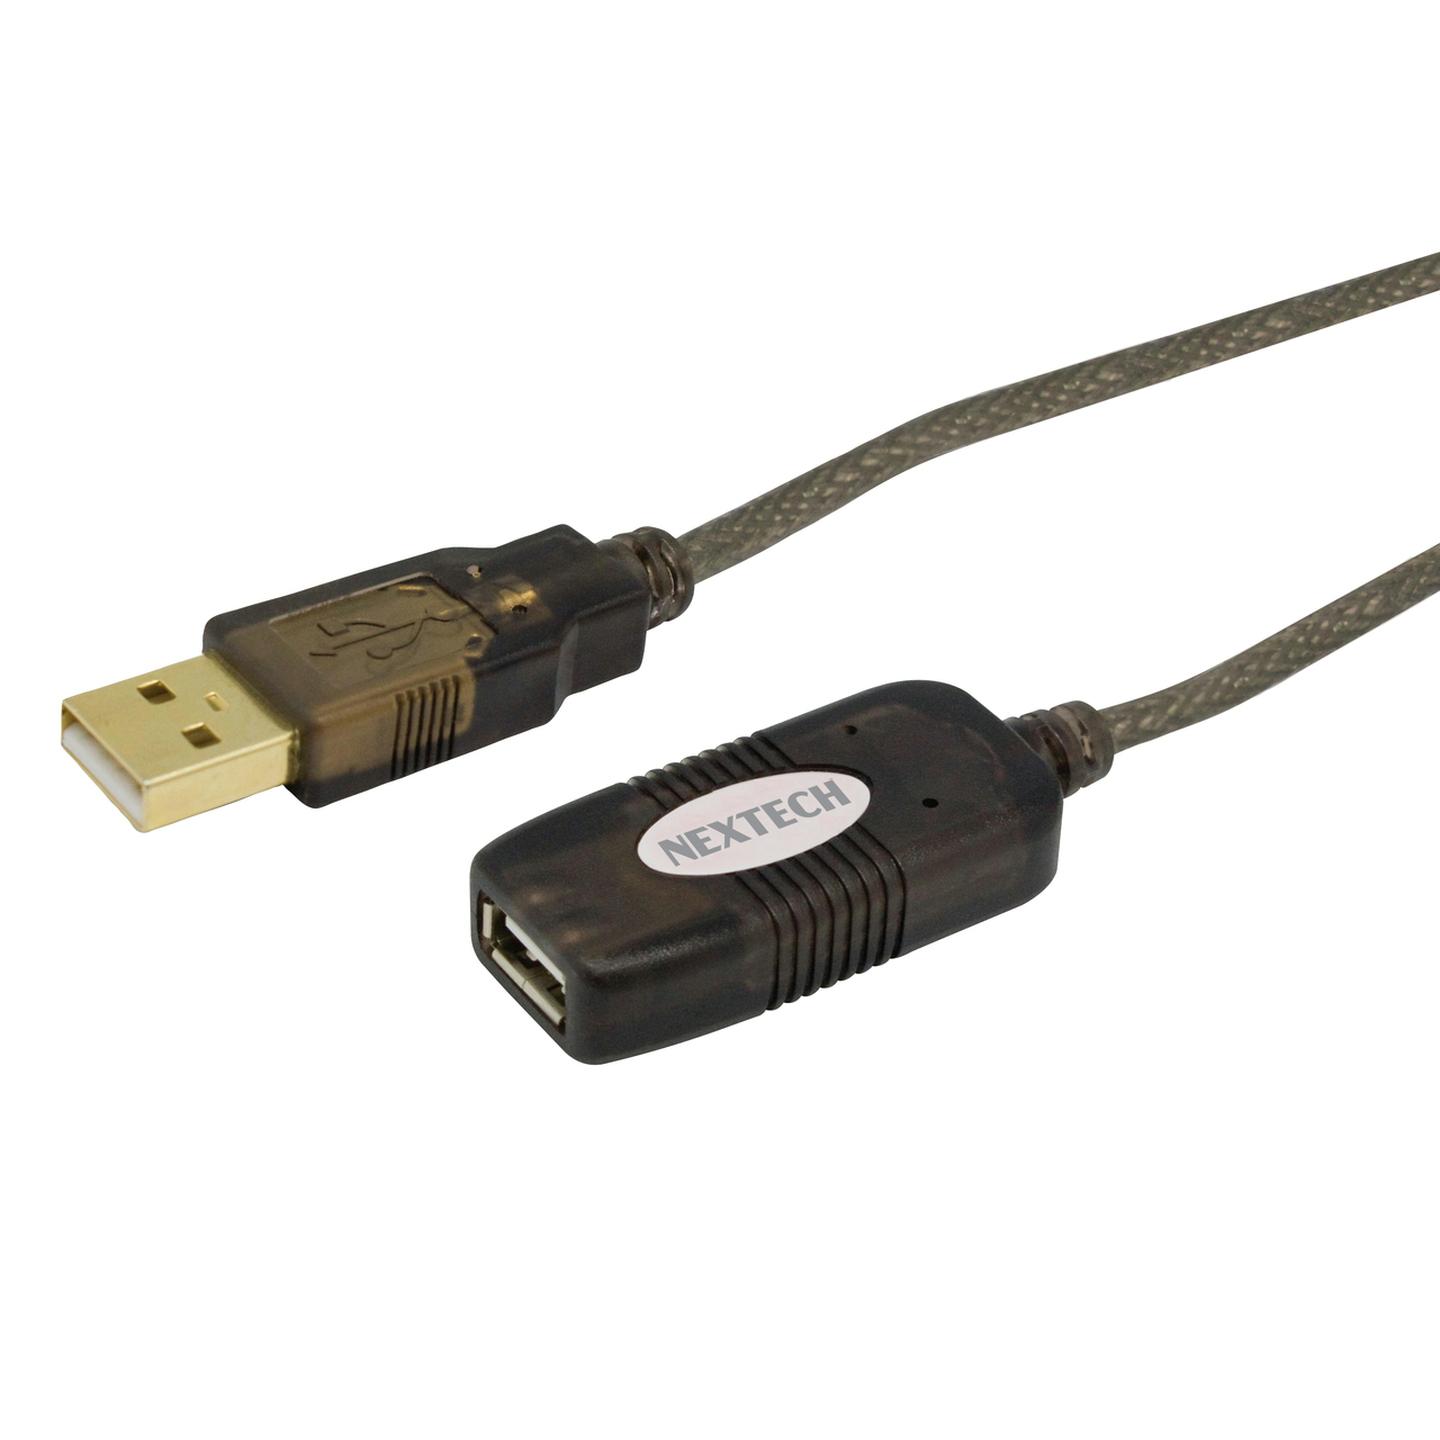 Powered USB 2.0 Extension Cable 20m